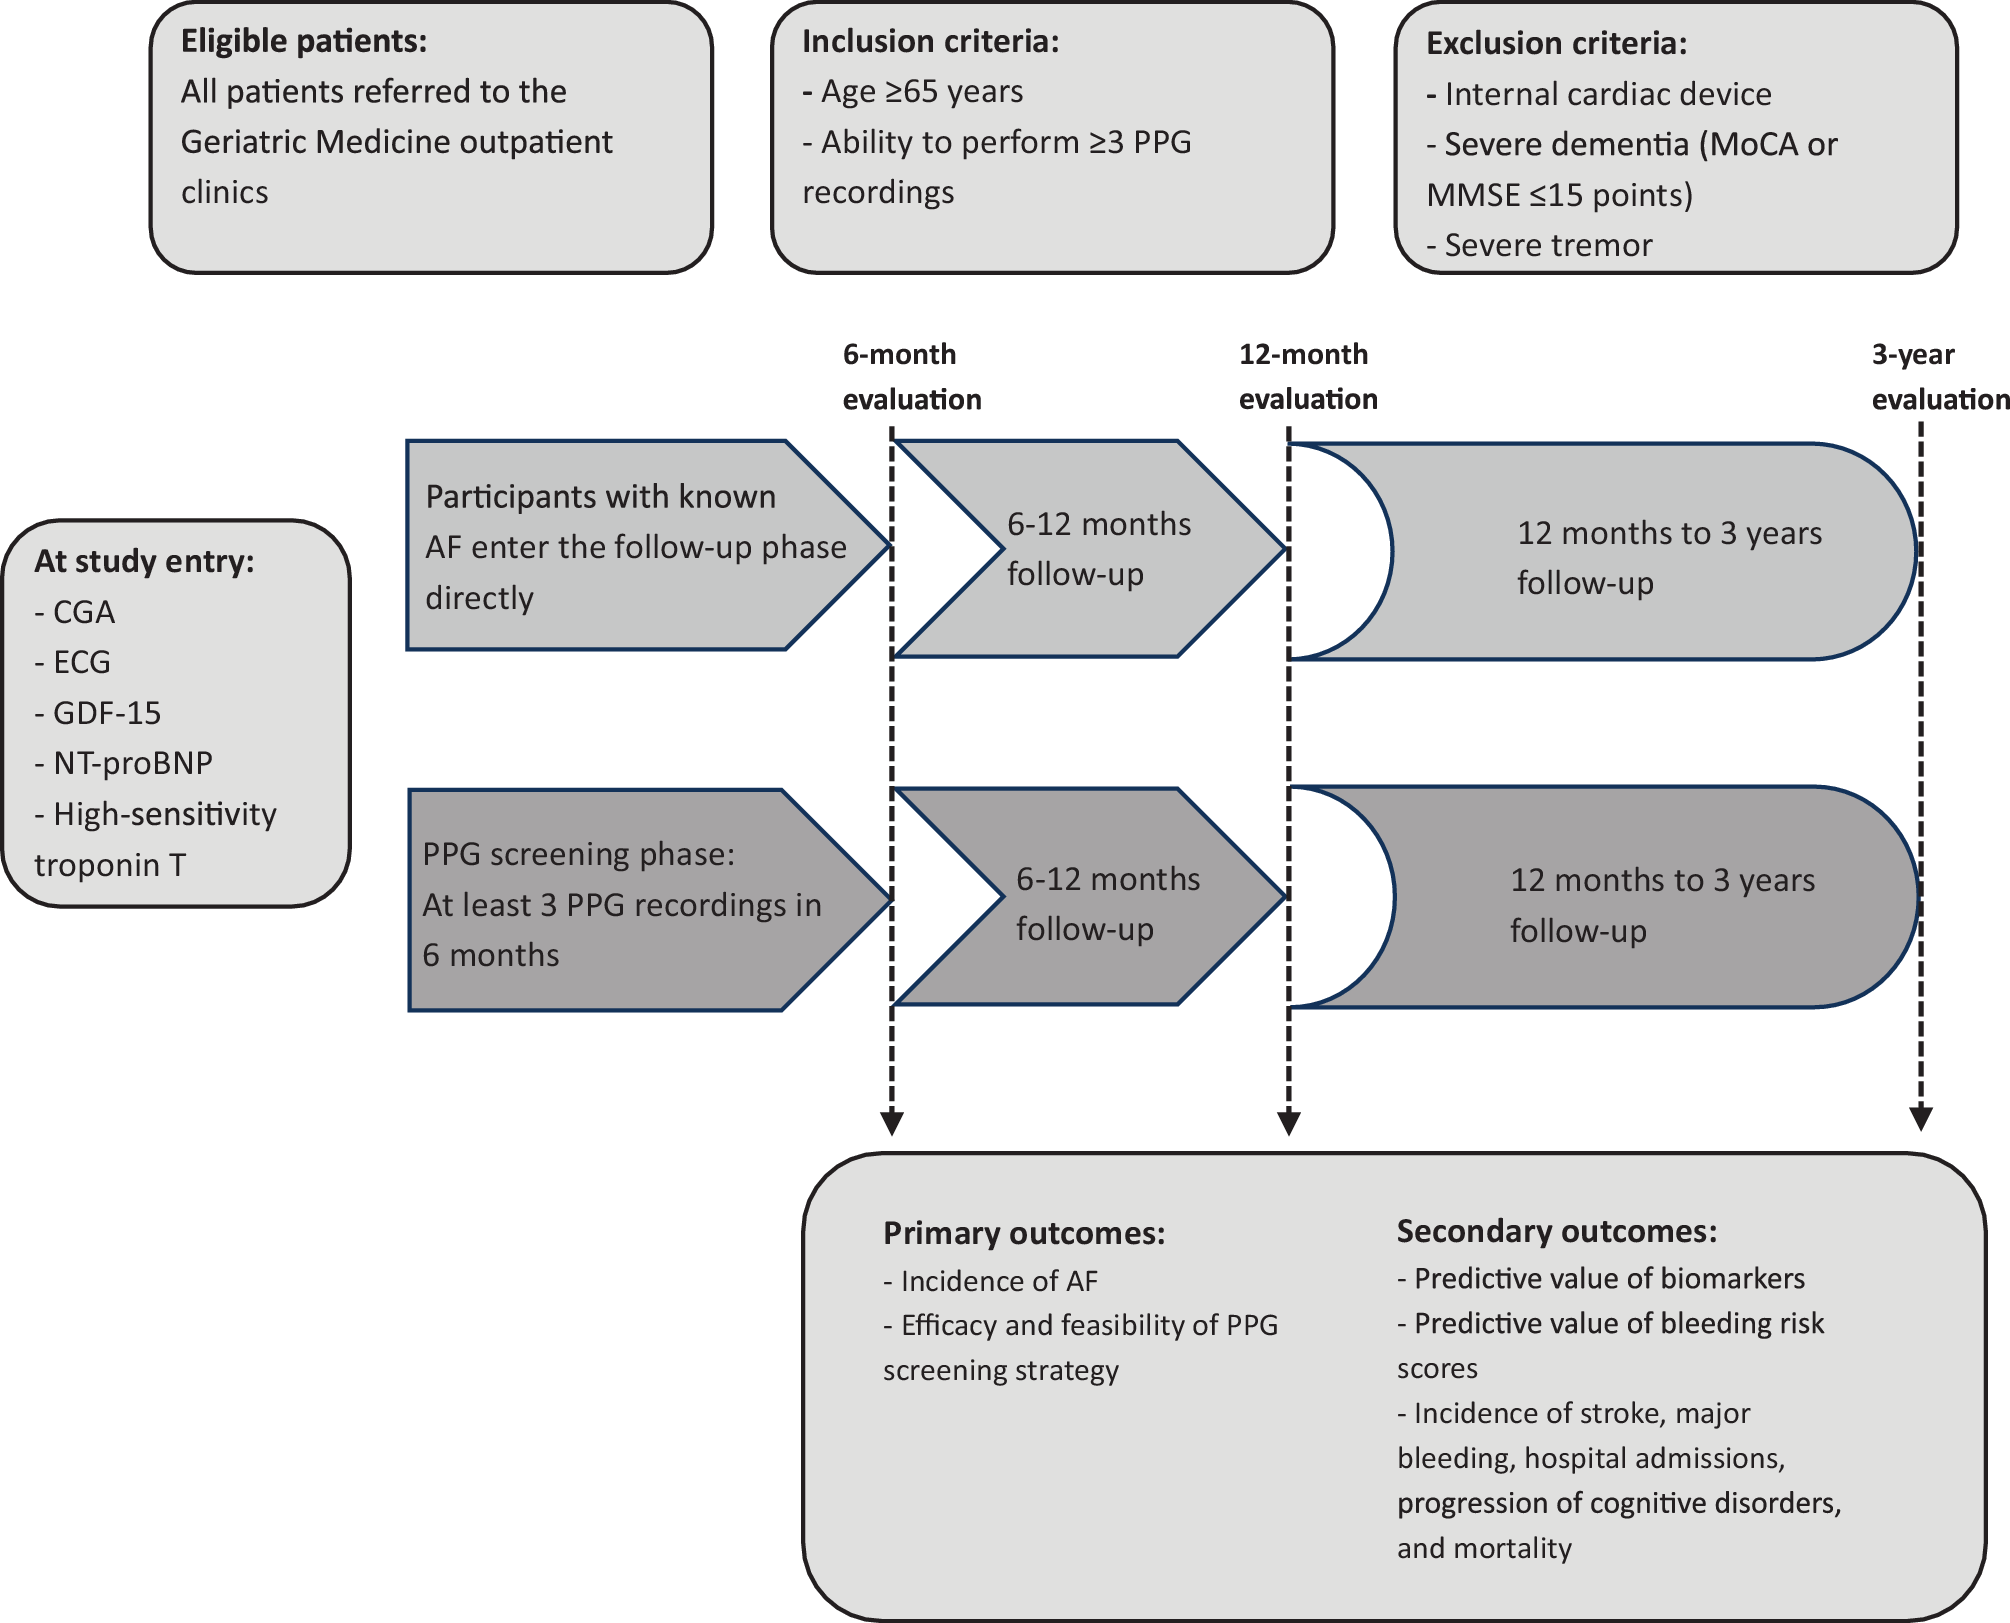 Design of the Dutch multicentre study on opportunistic screening of geriatric patients for atrial fibrillation using a smartphone PPG app: the Dutch-GERAF study